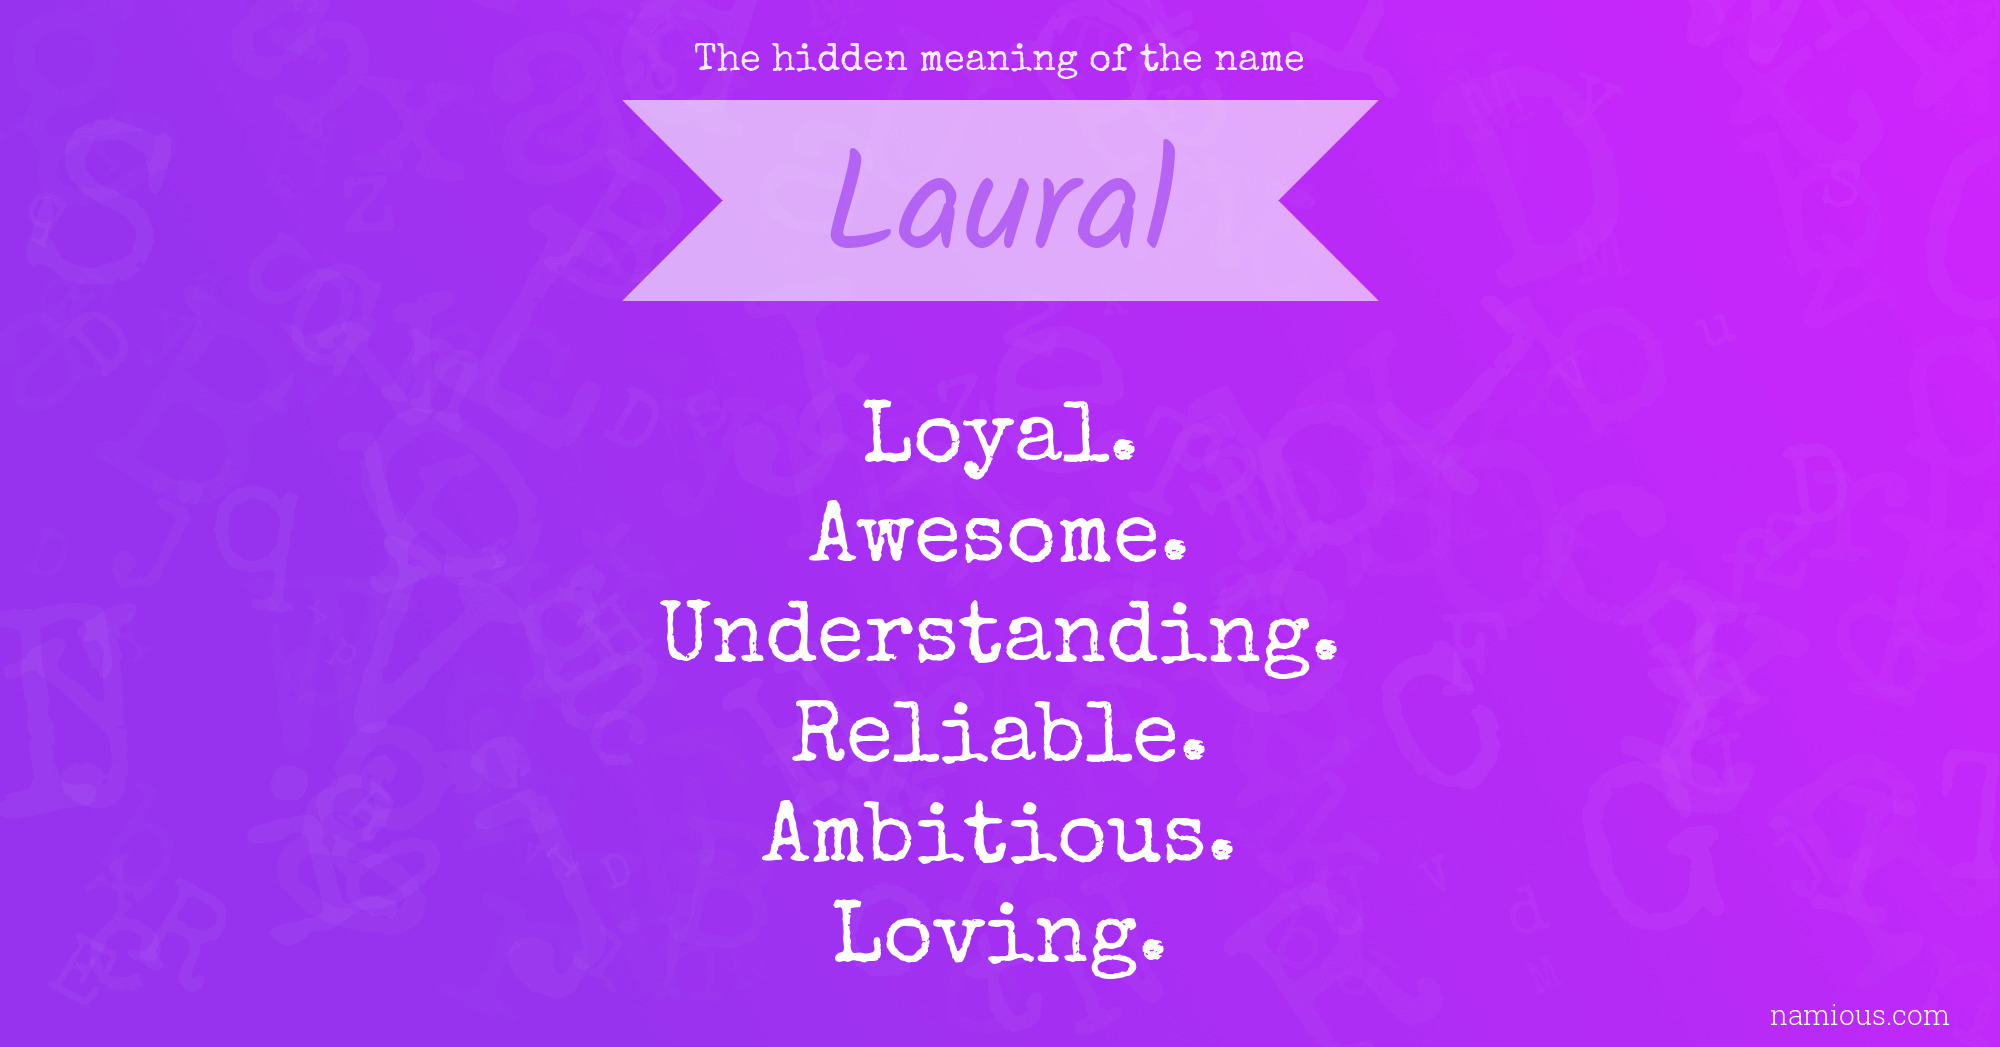 The hidden meaning of the name Laural